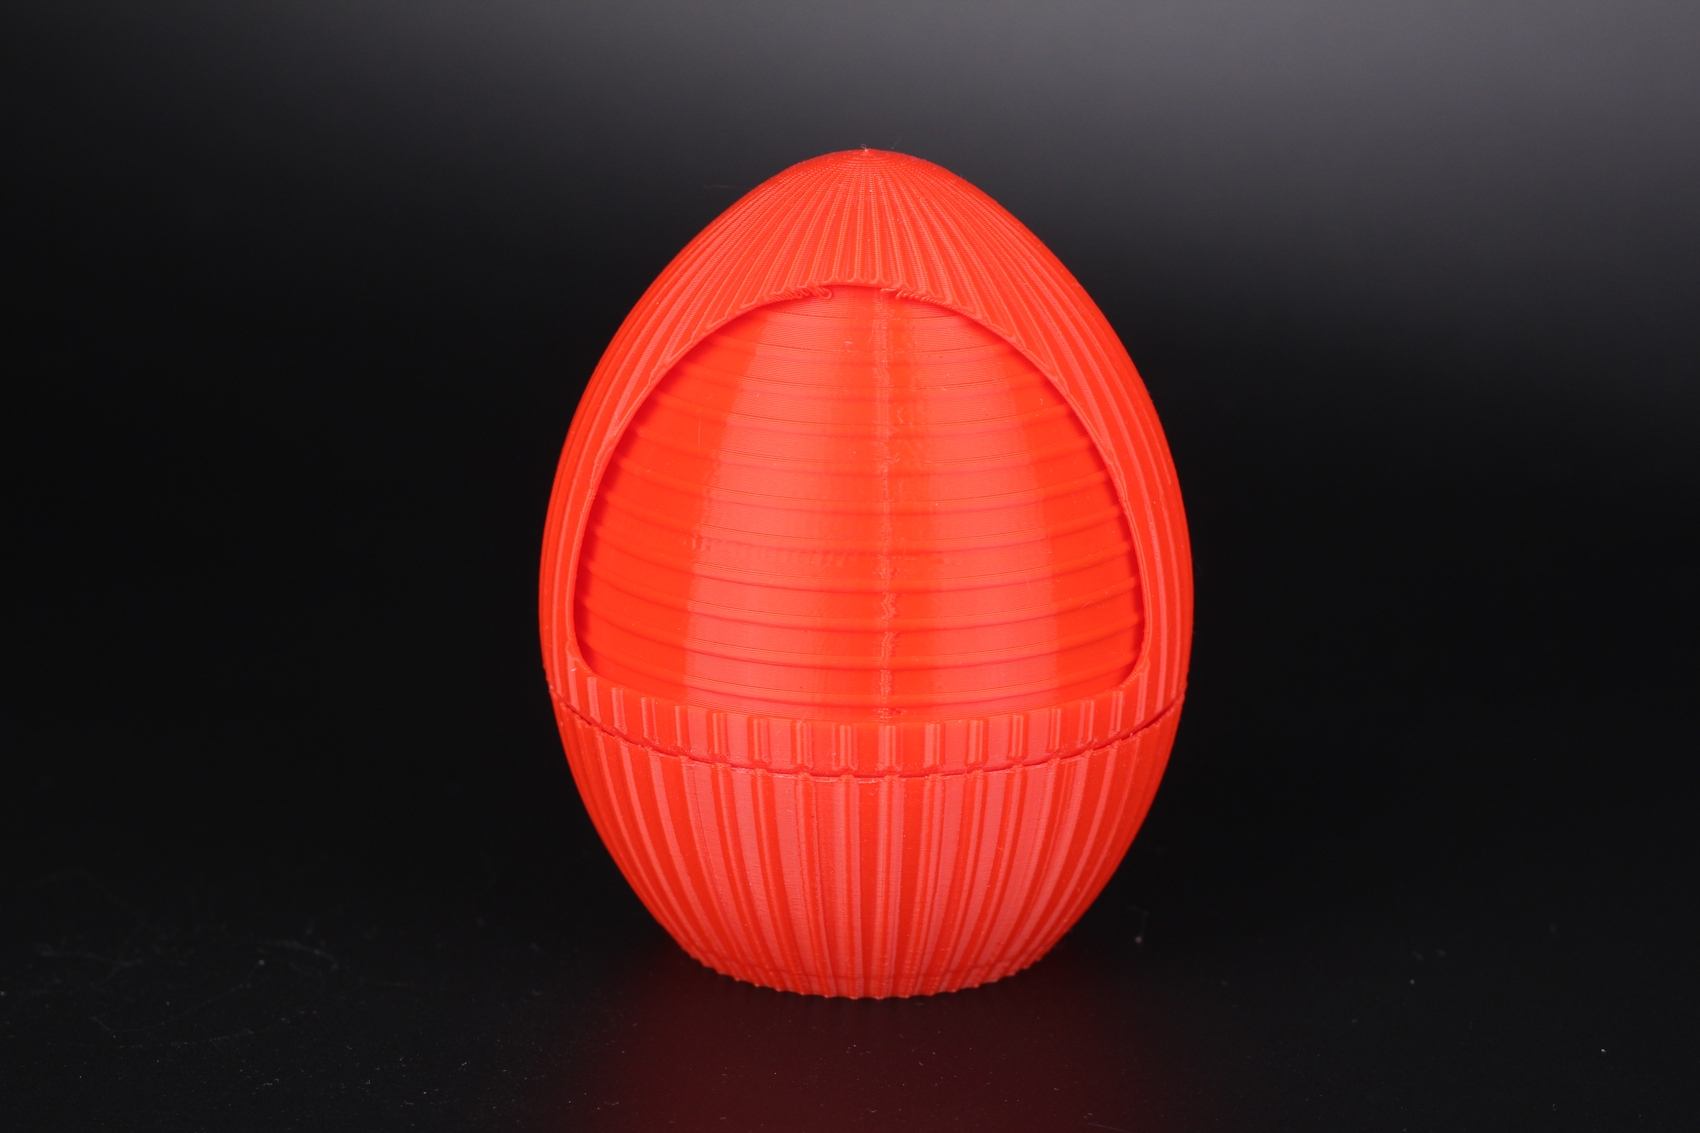 Magic Planetary Egg Container Ender 3 S1 Review4 | Creality Ender 3 S1 Pro Review: The Ultimate Ender 3